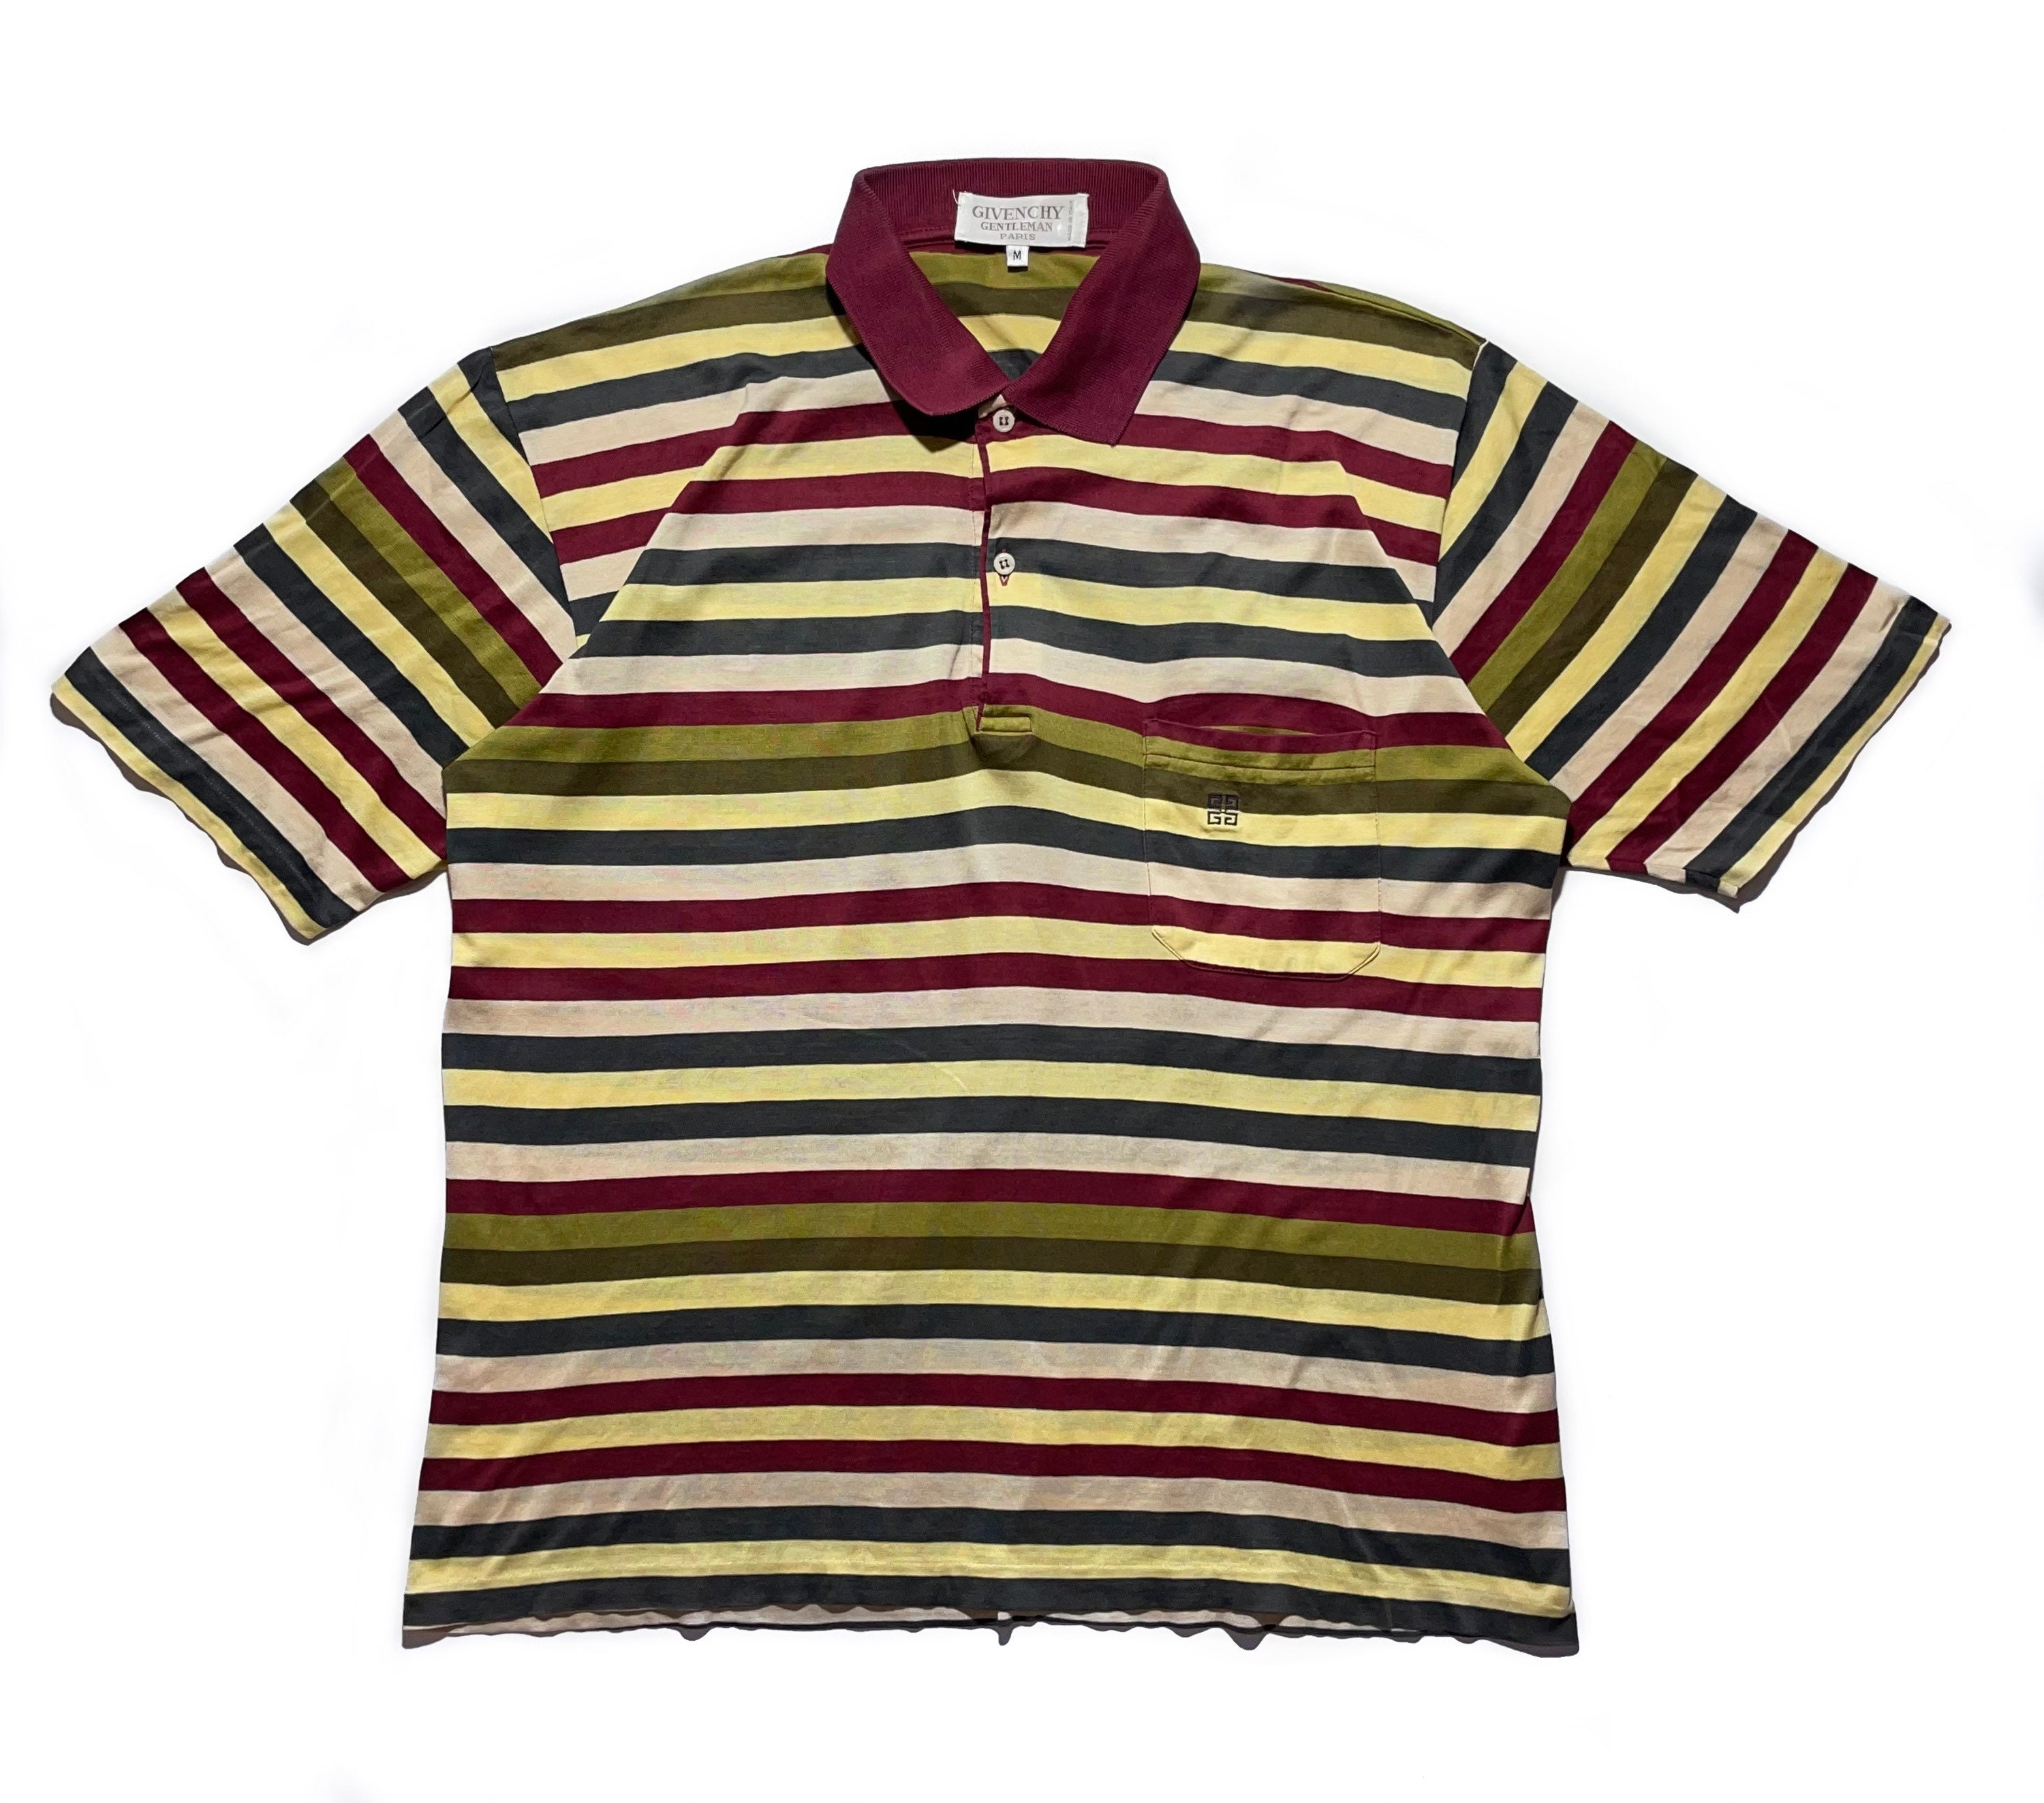 Givenchy Gentleman Vintage Stripped Polo Shirt - Etsy